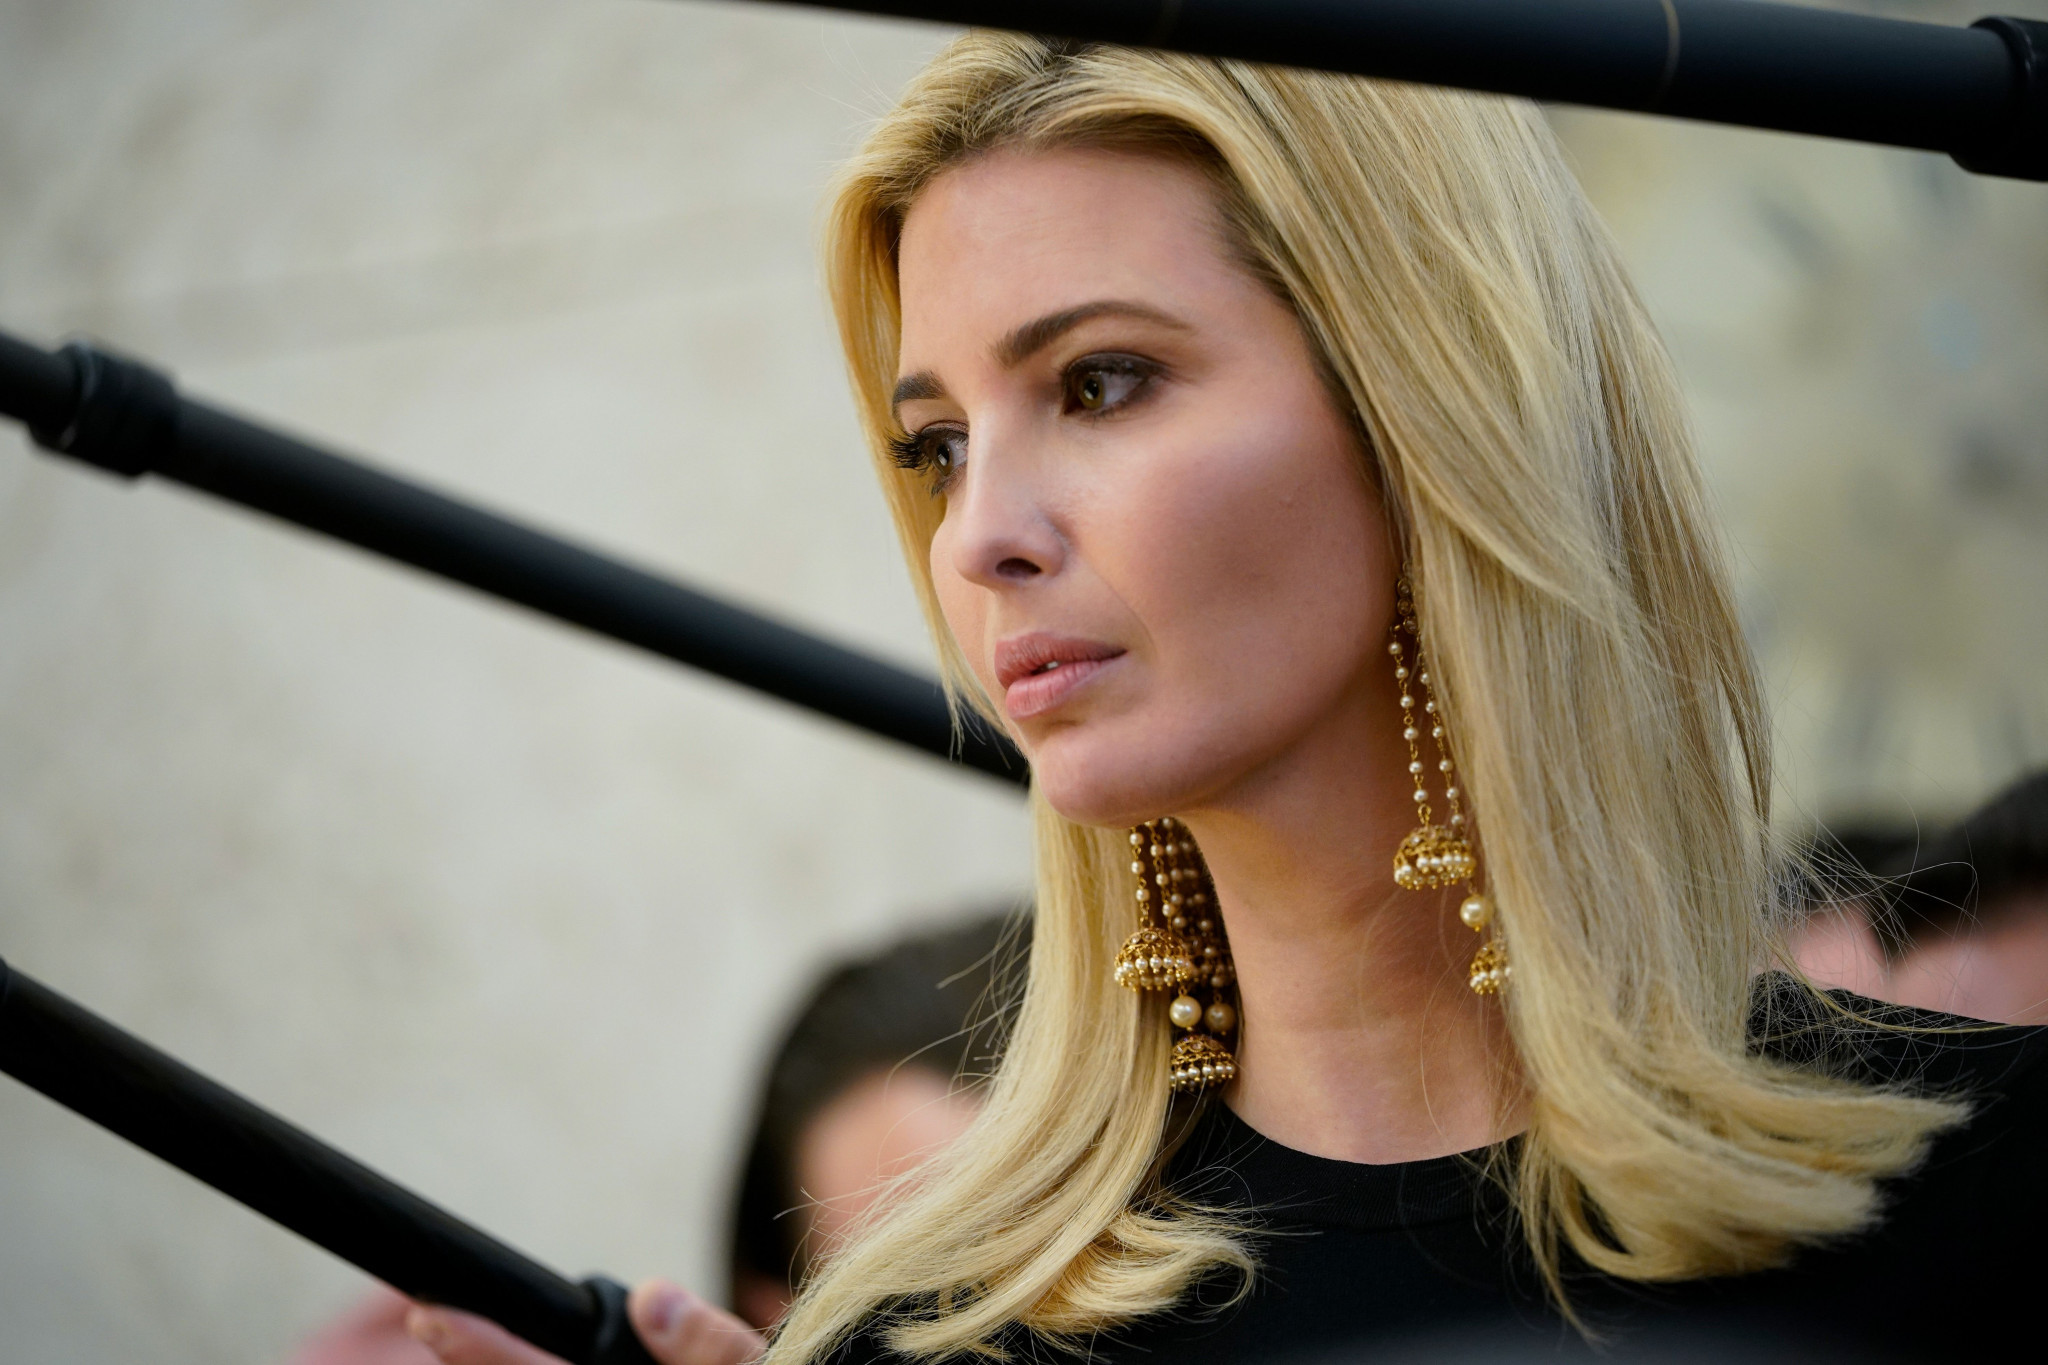 Ivanka Trump is leading a United States delegation for the Closing Ceremony of Pyeongchang 2018 ©Getty Images